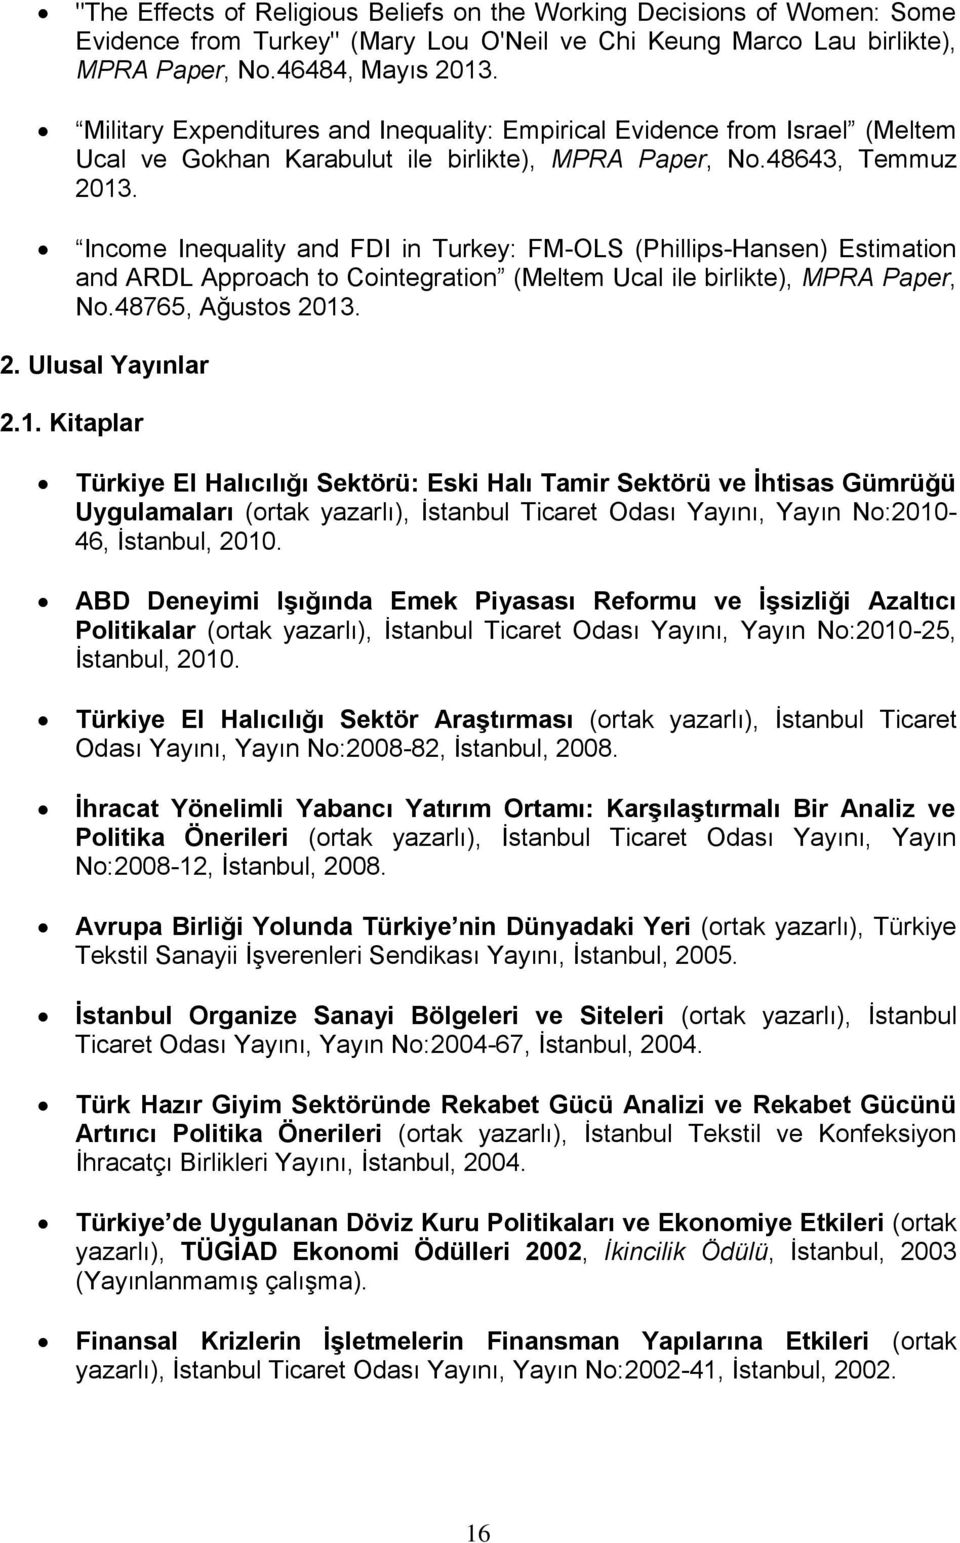 Income Inequality and FDI in Turkey: FM-OLS (Phillips-Hansen) Estimation and ARDL Approach to Cointegration (Meltem Ucal ile birlikte), MPRA Paper, No.48765, Ağustos 2013